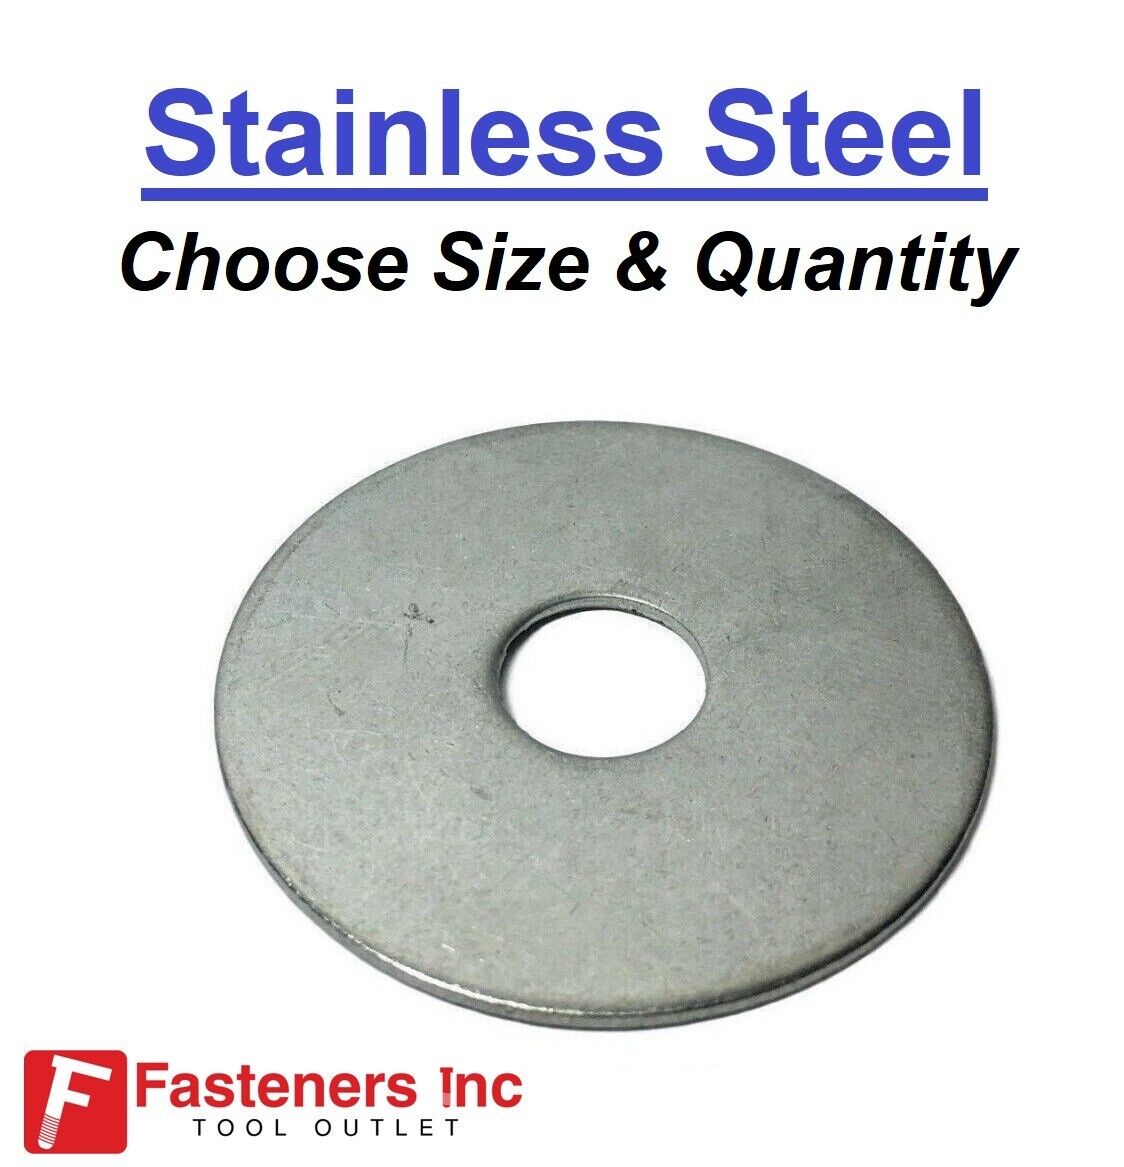 OD Stainless Steel Fender Washers Type 304 (Choose Size & Quantity)